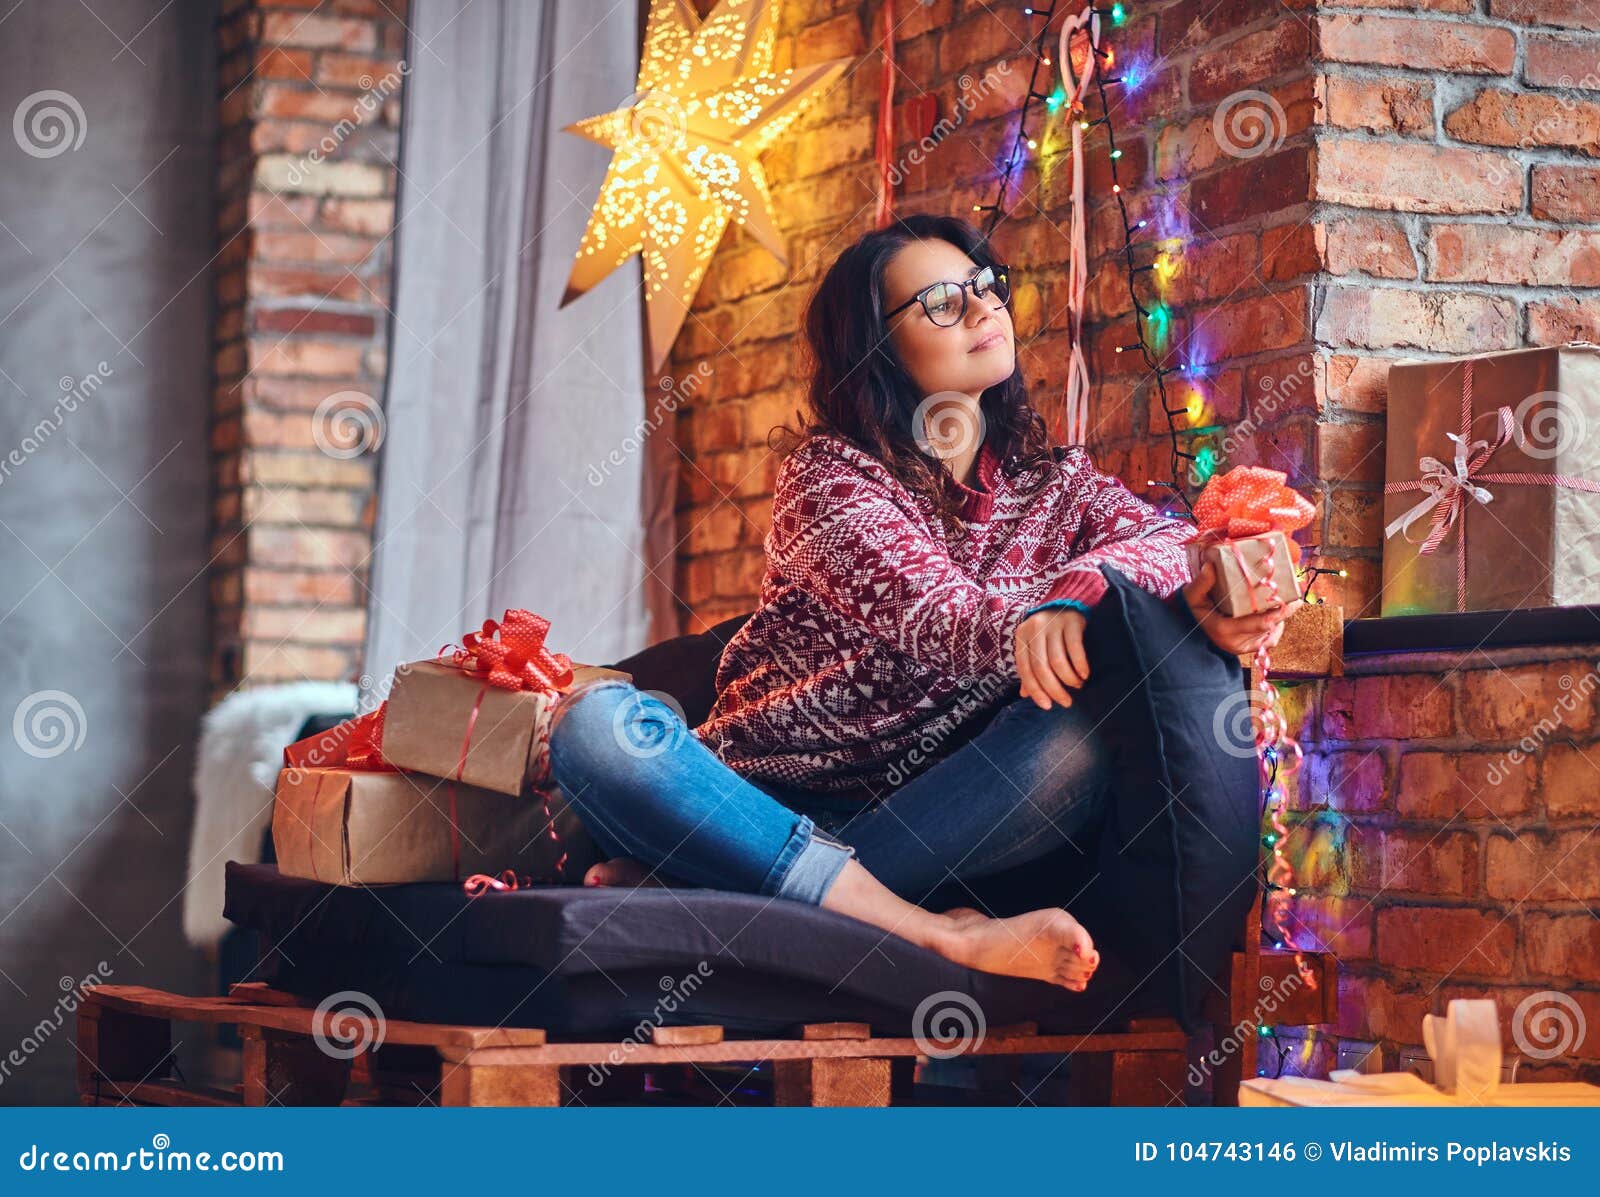 Brunette Female In A Room With Christmas Decoration Stock Photo Image Of Loft Santa